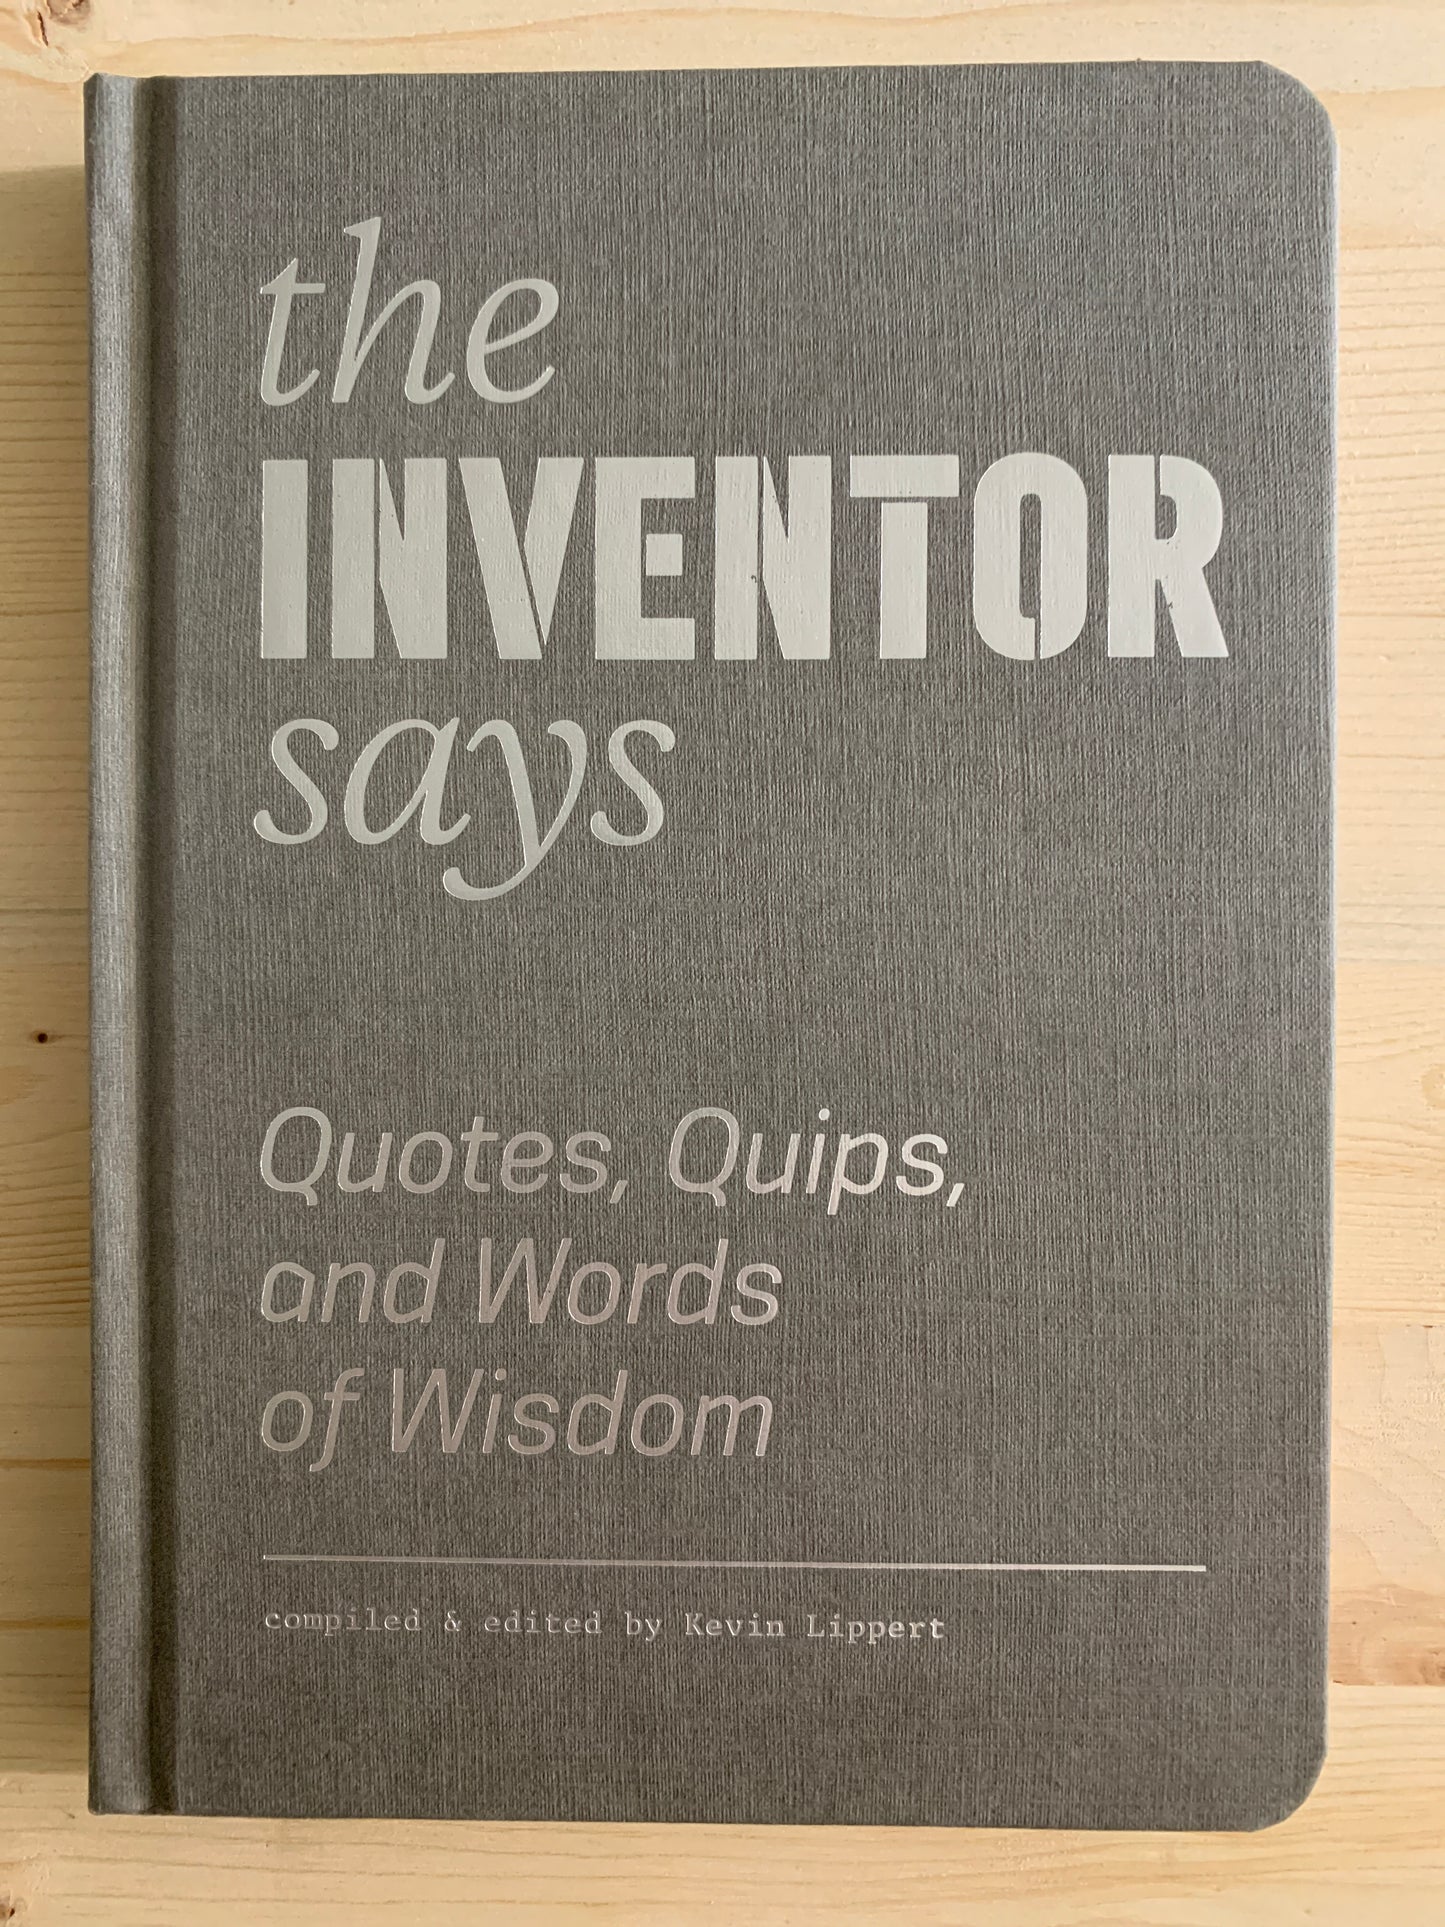 The Inventor Says